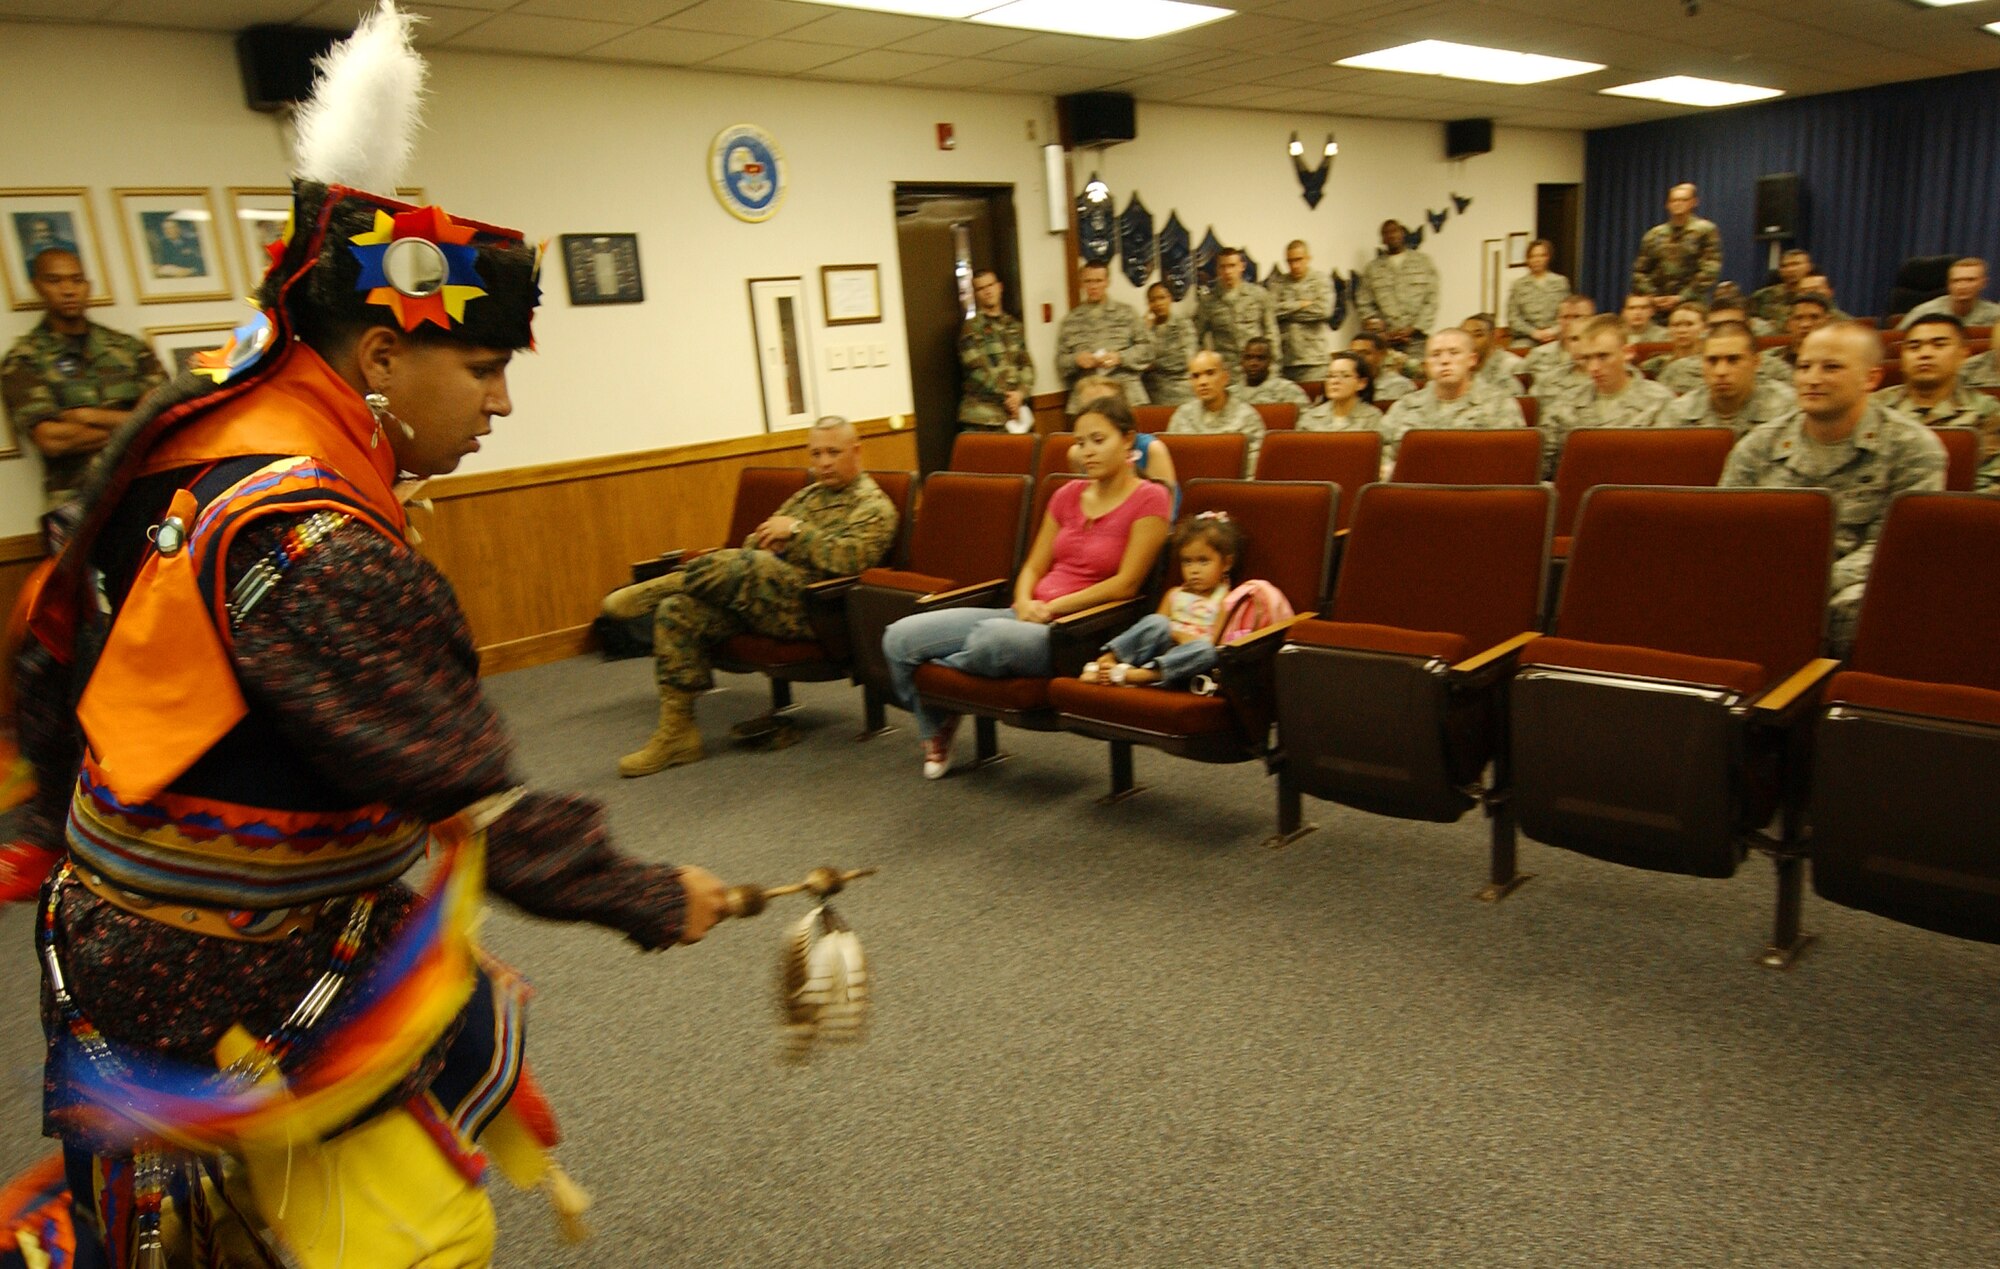 Technical Sgt. Thundercloud Hirajeta performs a traditional dance called the "War Dance" during American Indian and Alaskan Native Heritage month Nov. 14, 2008. The event commemorated the Native American and Alaskan cultures and the important role Native Americans played as code talkers during the WWII battles in the Pacific Region. 
(U.S. Air Force photo/Tech. Sgt. Rey Ramon)                                                    